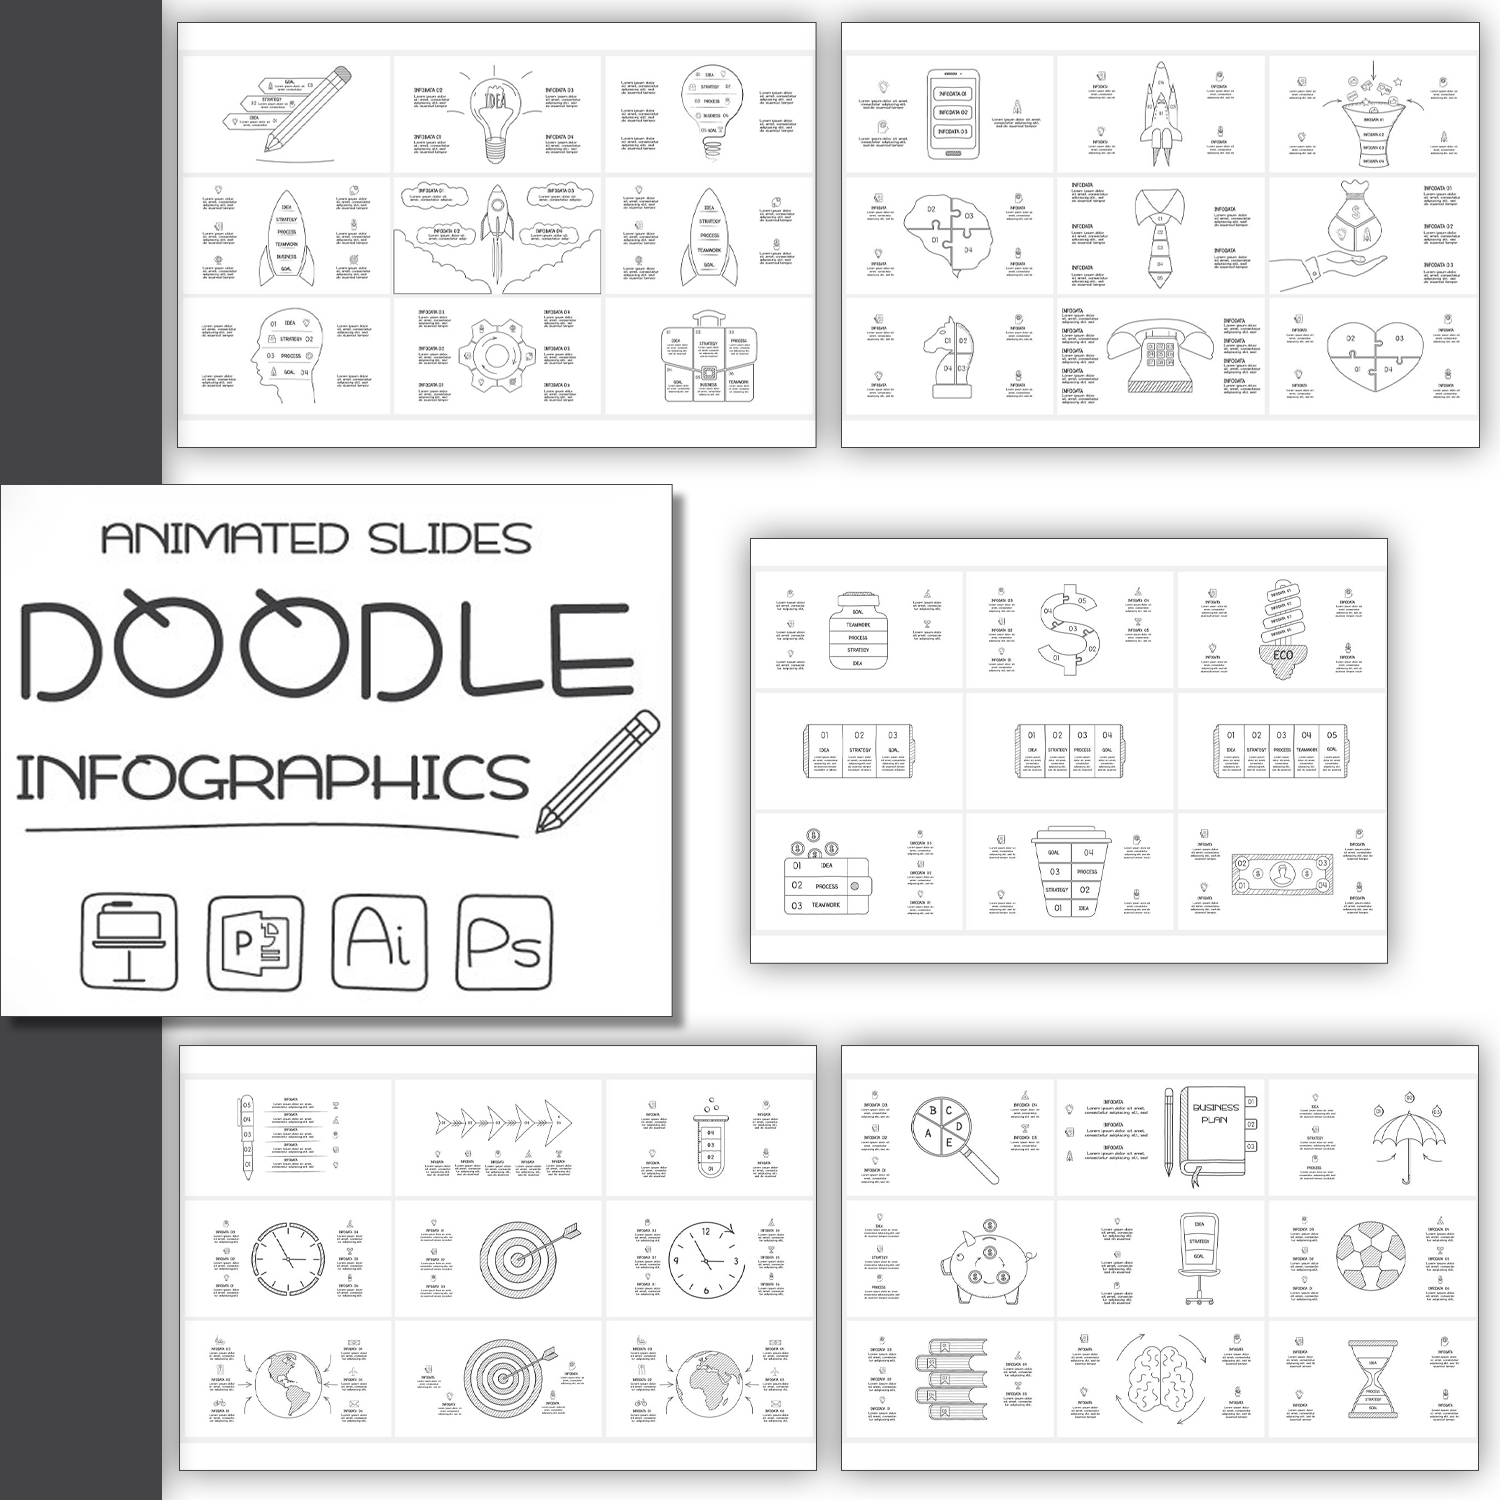 Doodle animated infographics preview.